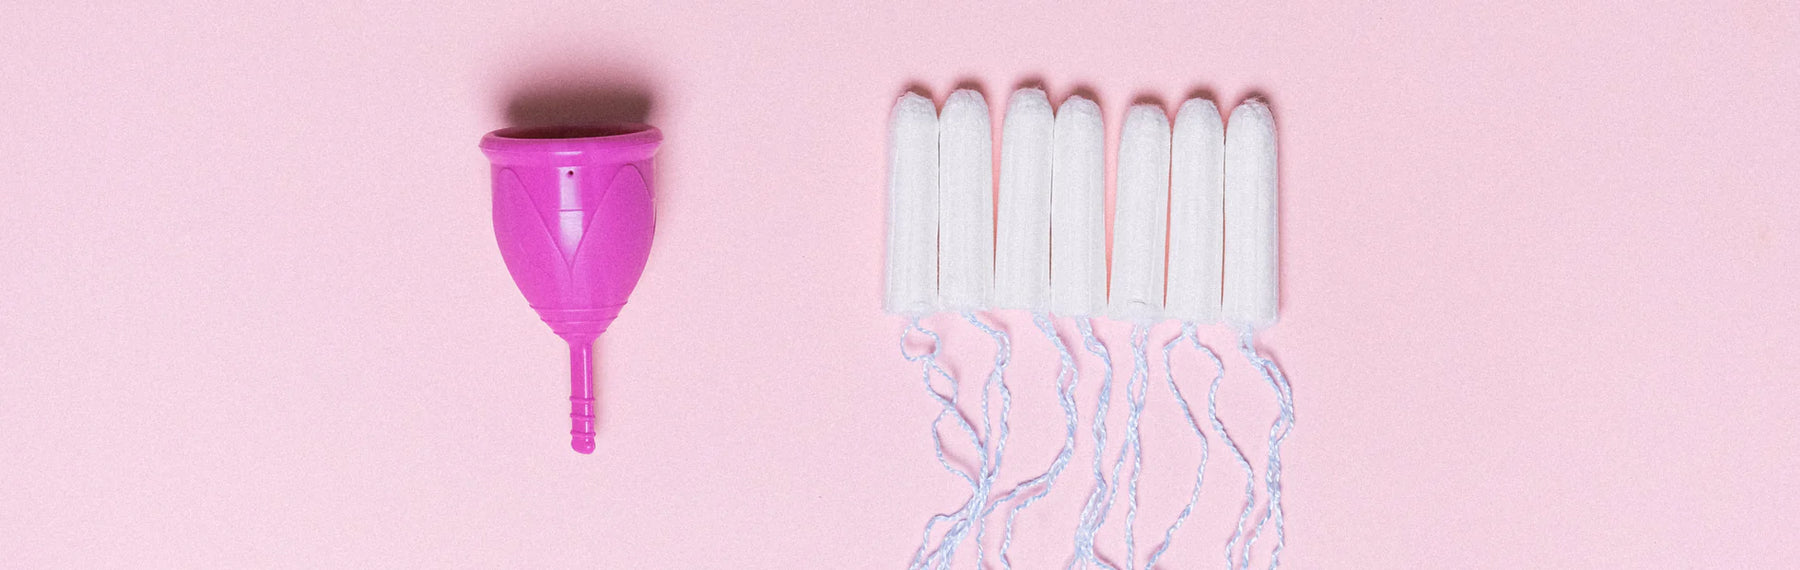 Busting Myths of 4 Inserted Period Products